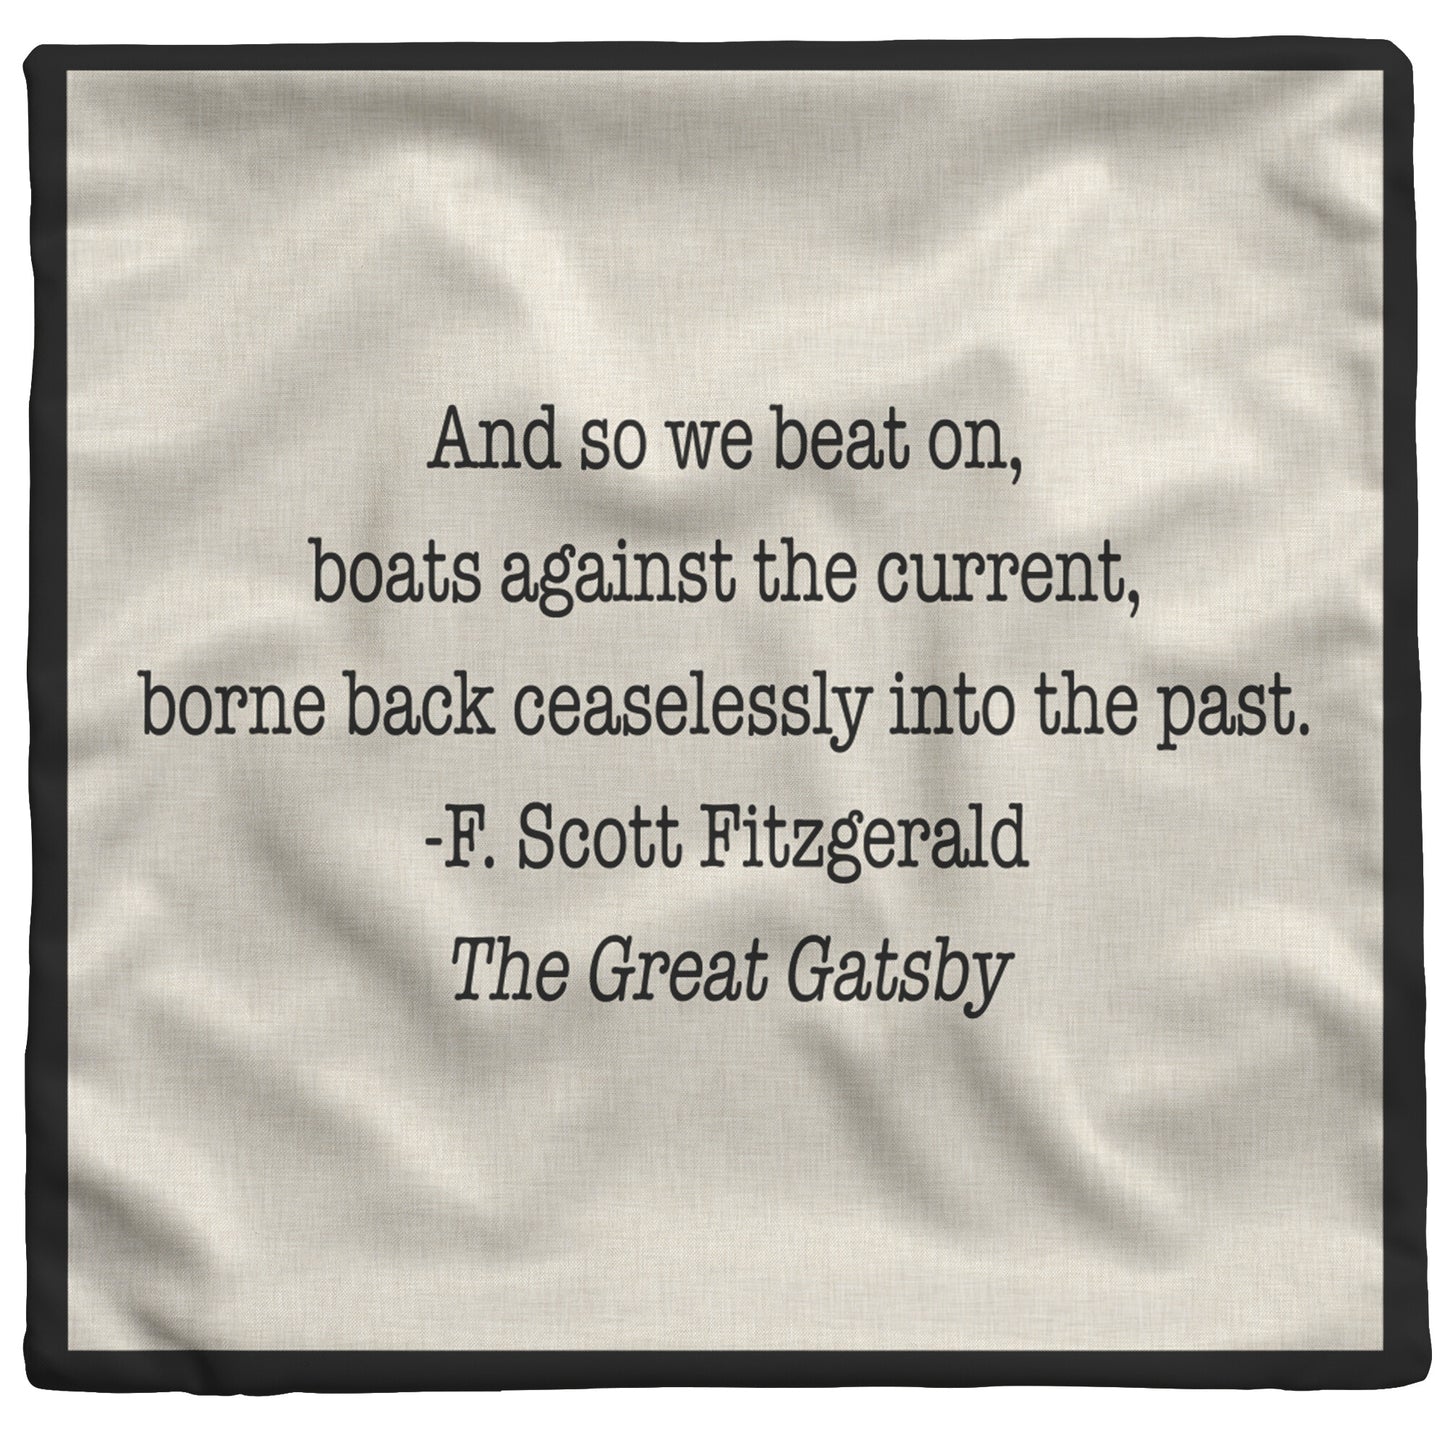 Gatsby Quote Literary Pillow, F. Scott Fitzgerald, The Great Gatsby Pillow - Amazing Faith Designs